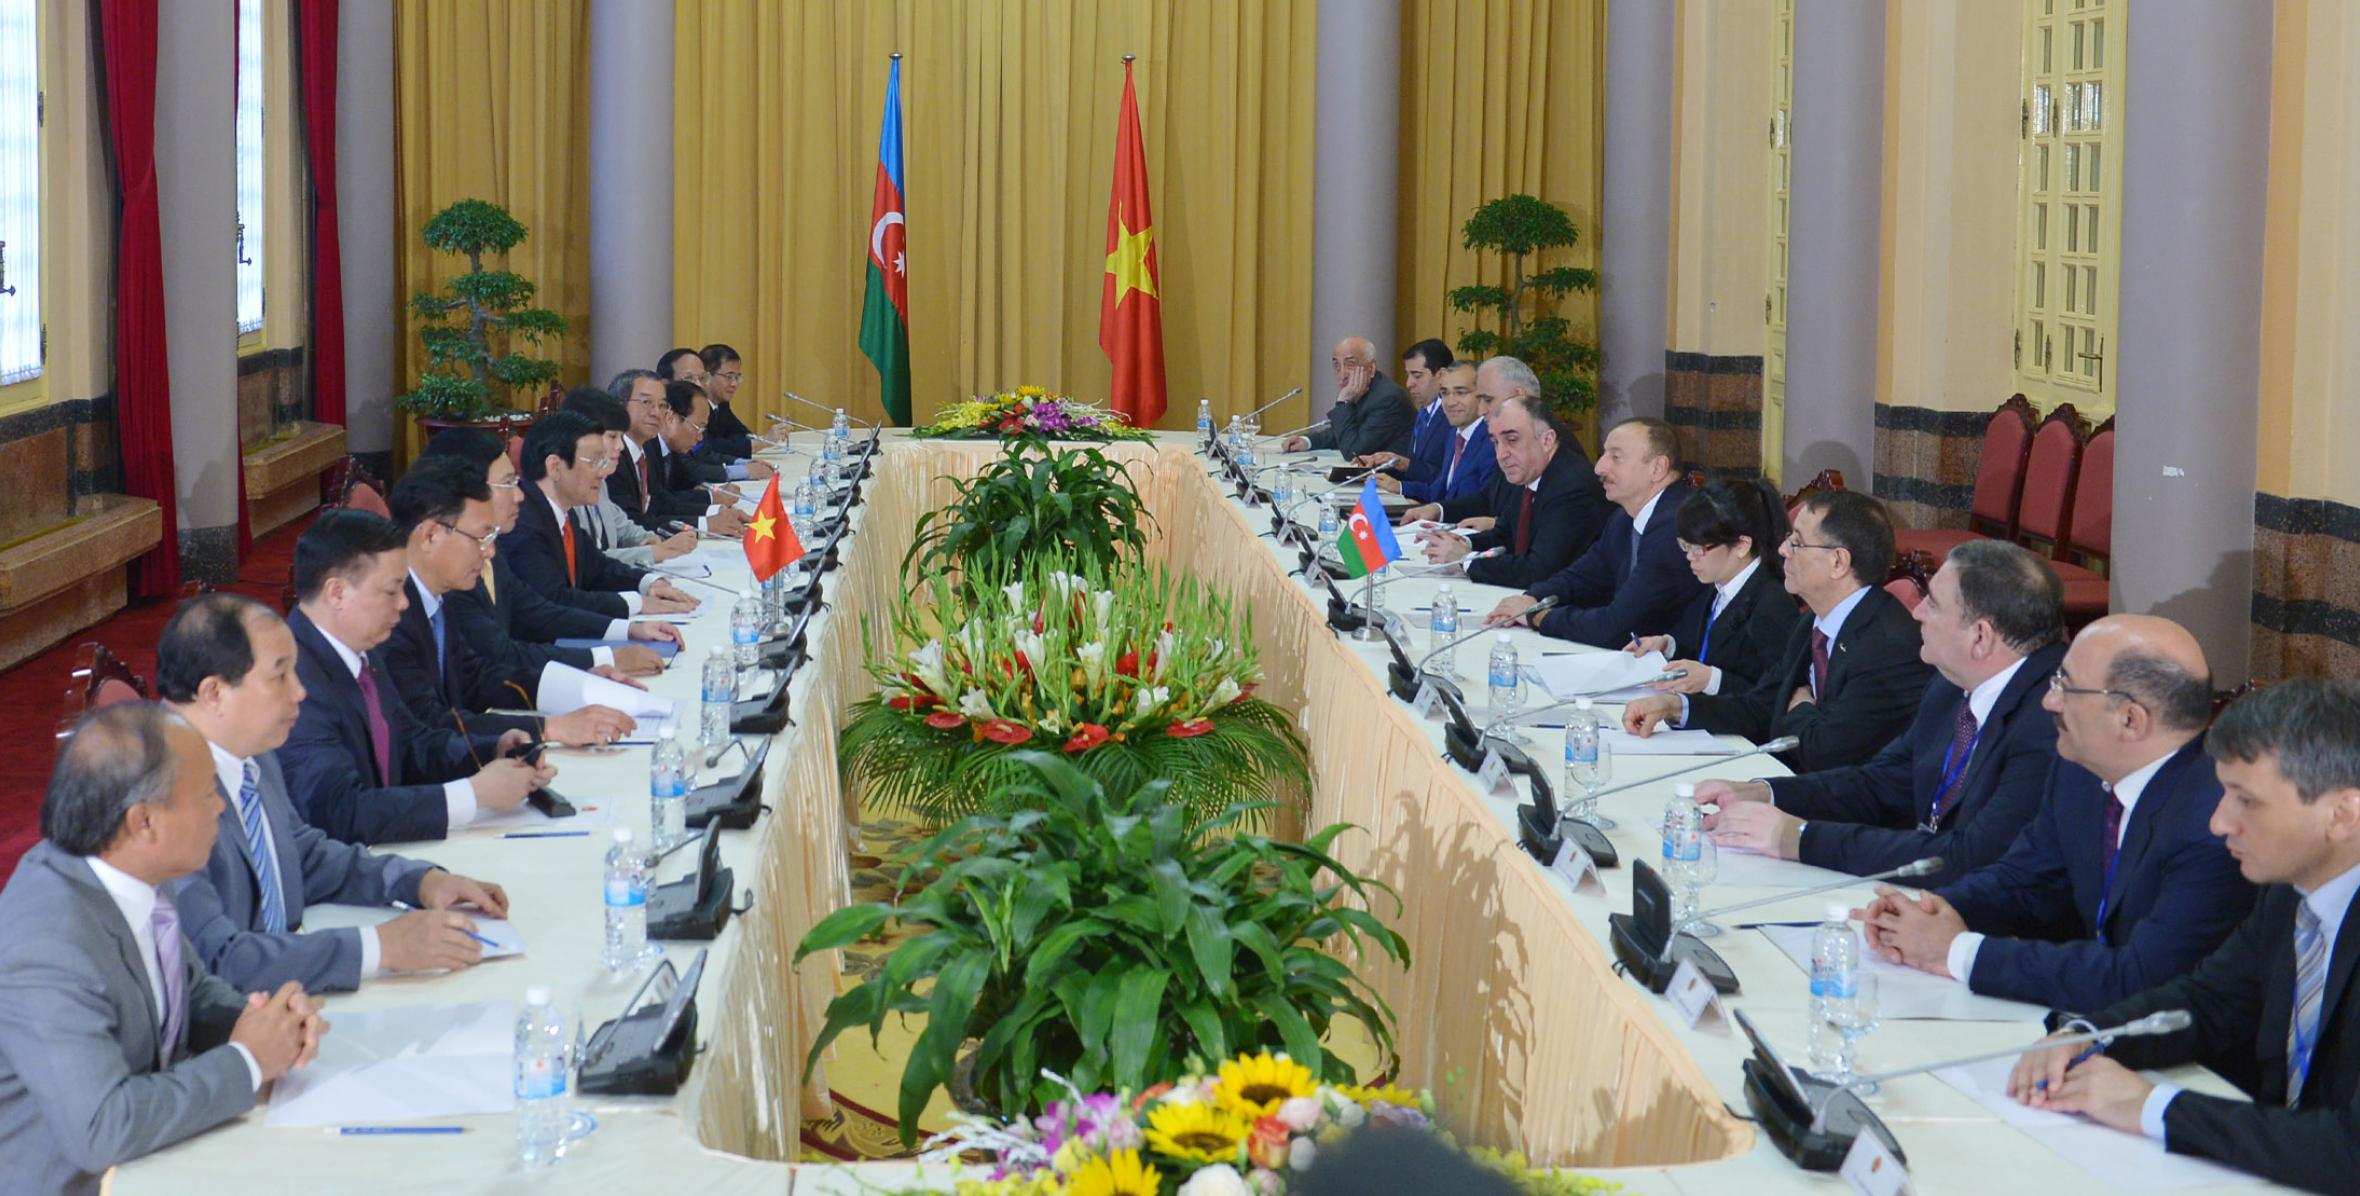 Ilham Aliyev and President of the Socialist Republic of Vietnam Truong Tan Sang held a meeting in an expanded format